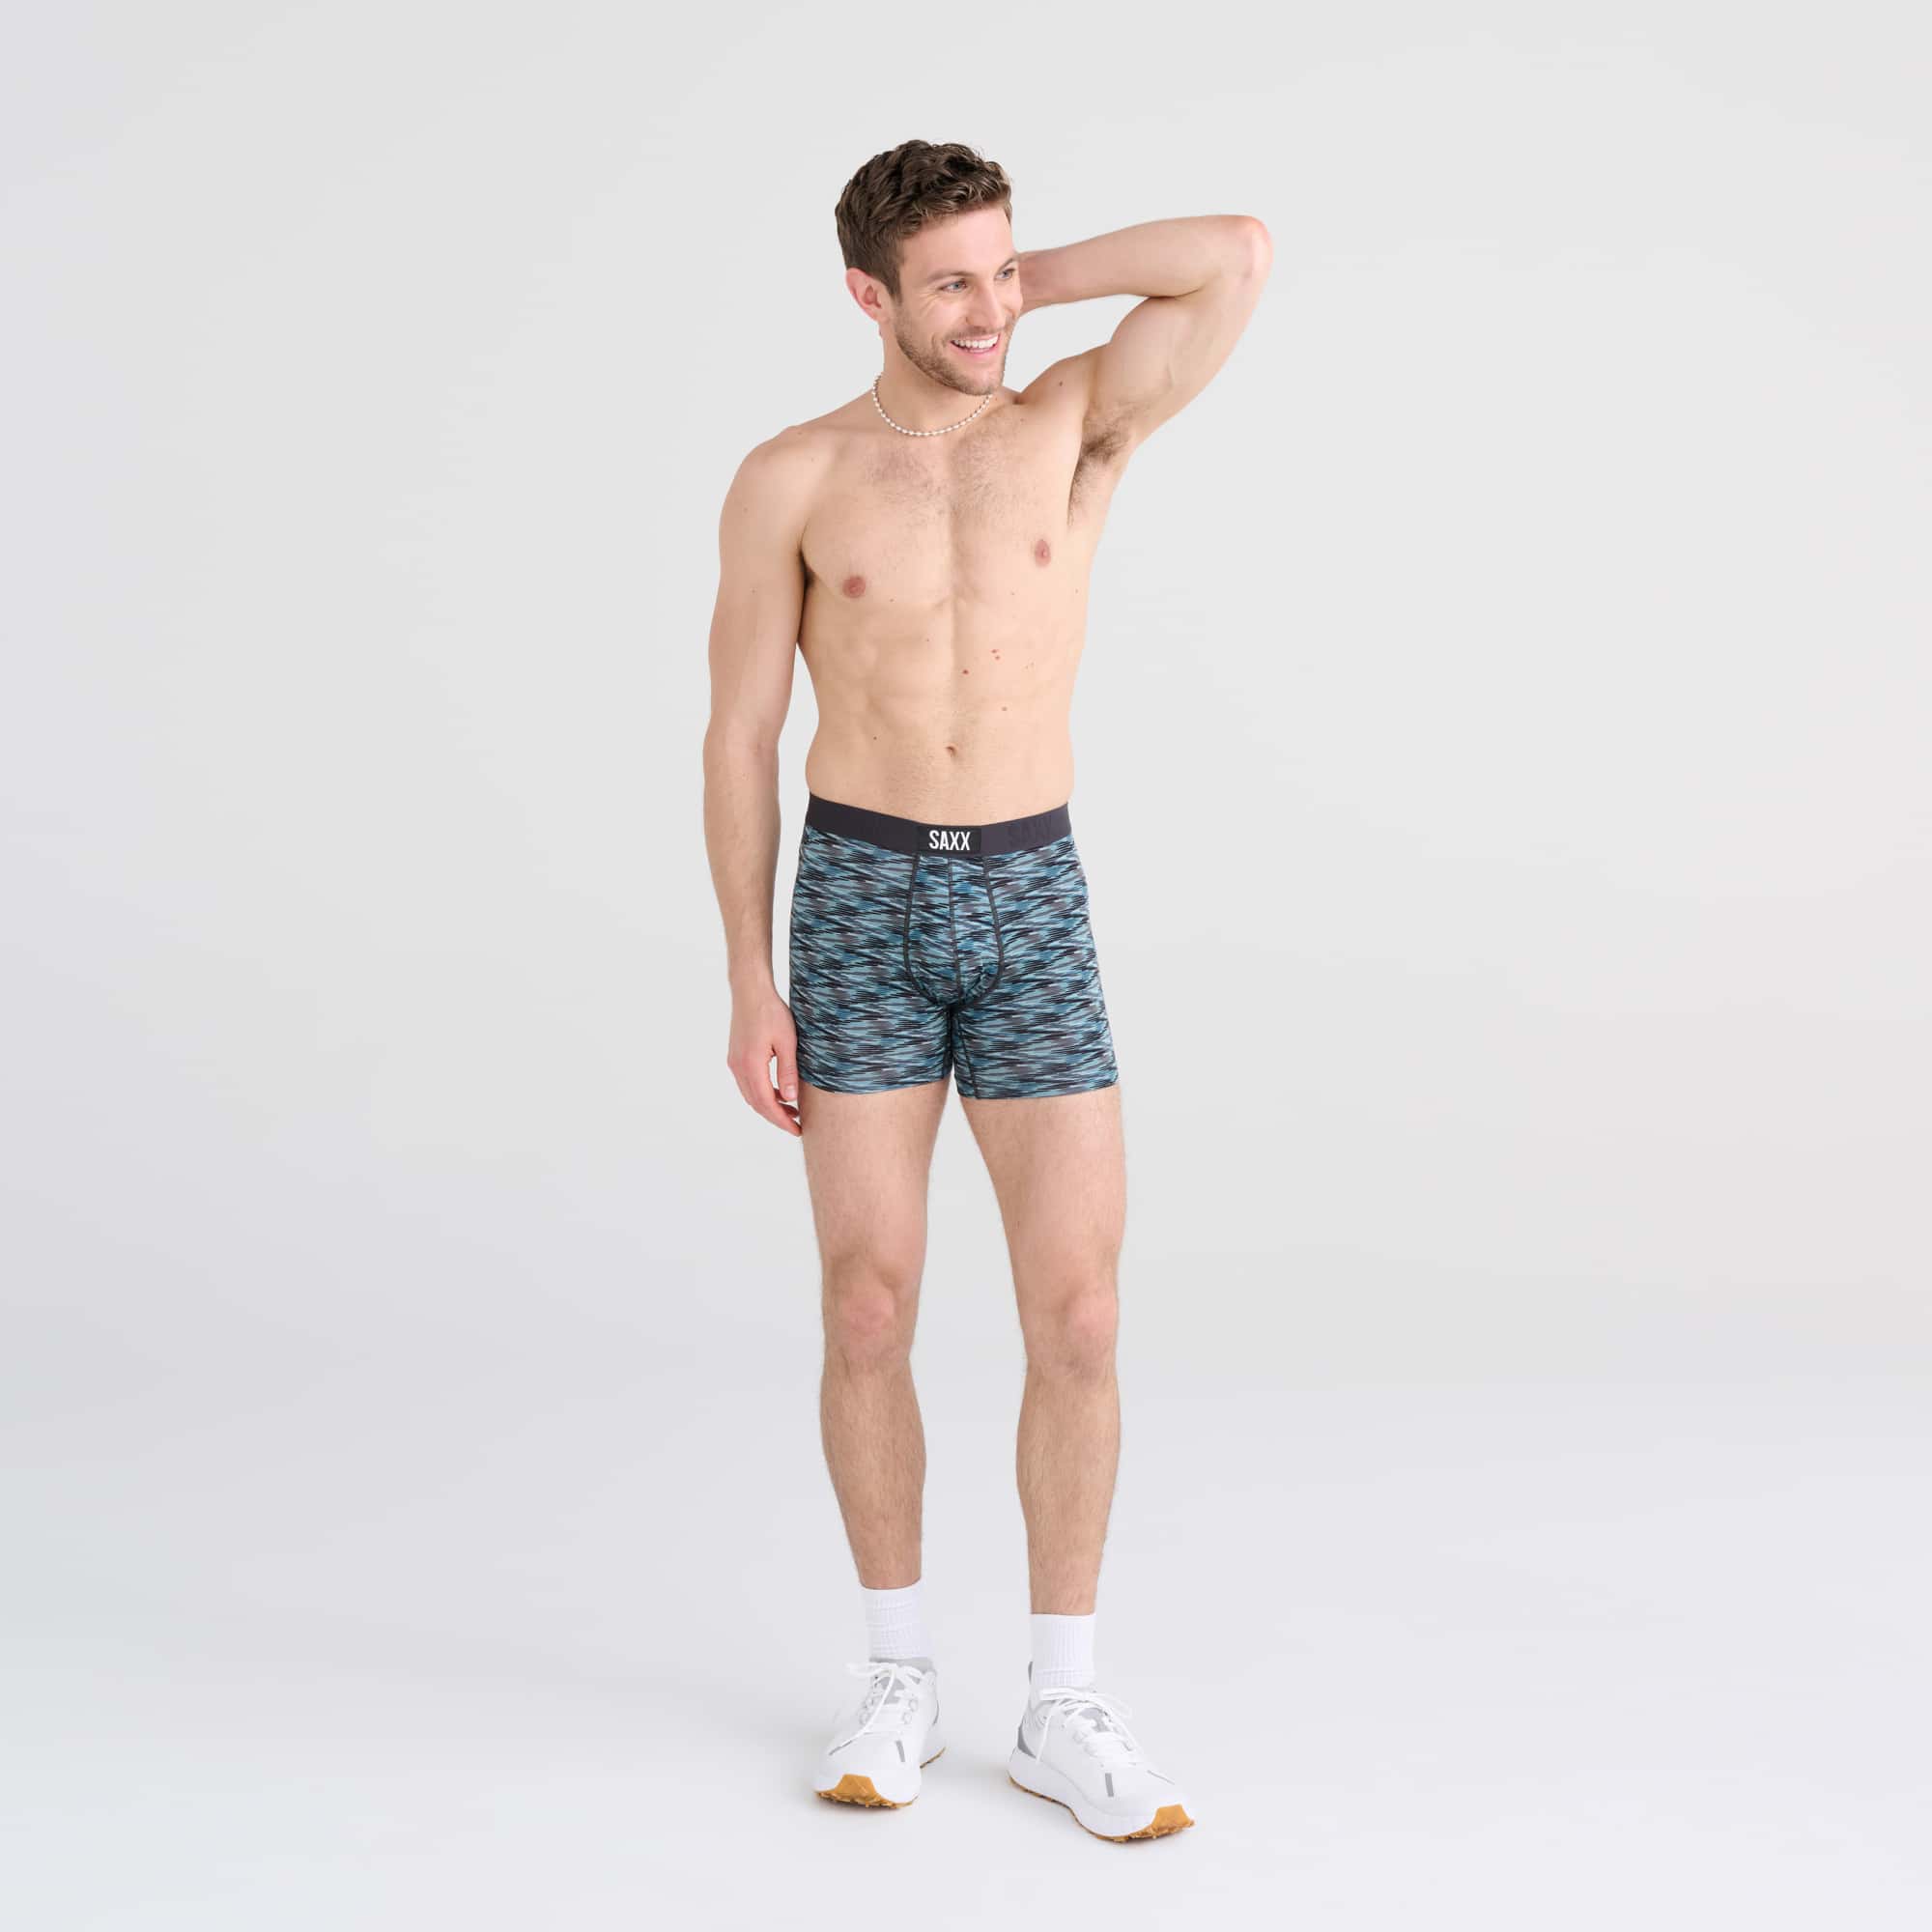 'SAXX Vibe Super Soft Boxer Brief - Action Spacedye' in 'Washed Teal' colour